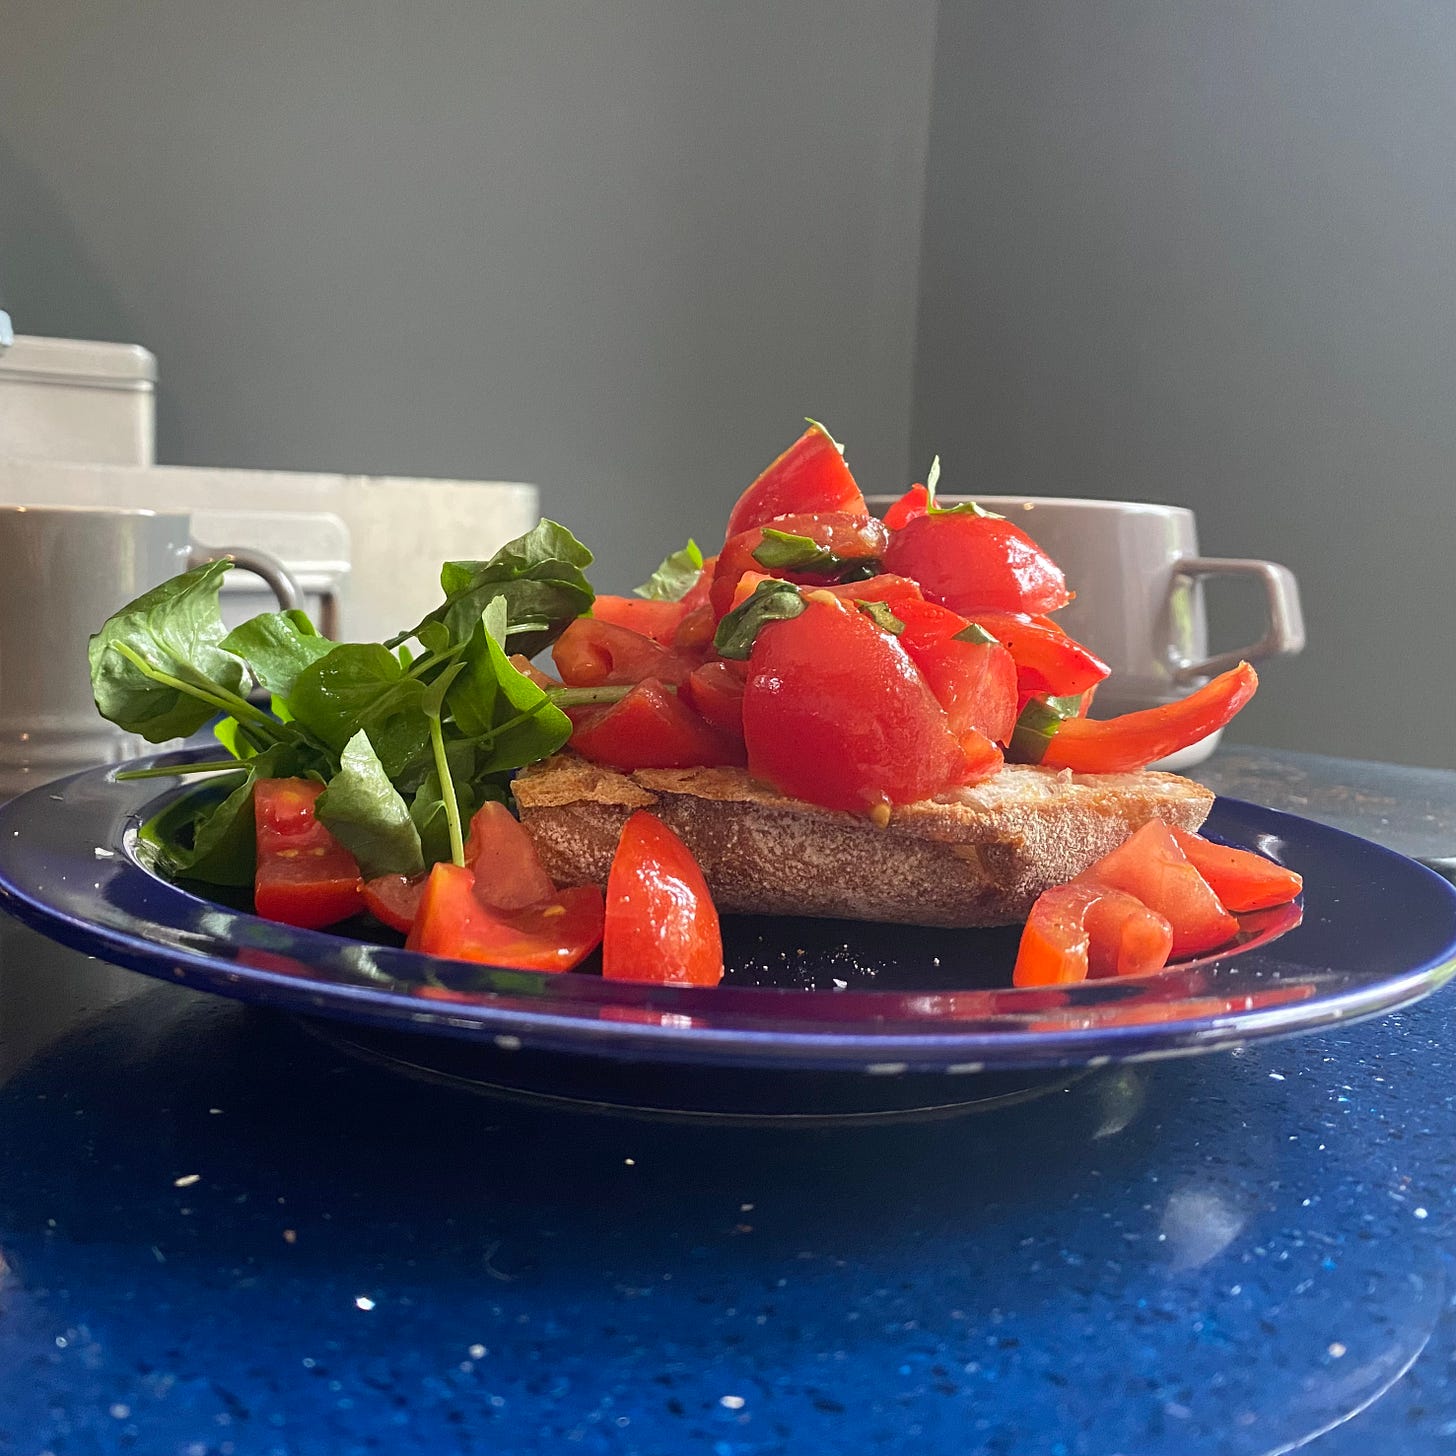 blue plate piled with ciabatta toast, fresh tomatoes, basil and salad leaves. Plate is placed on a blue worktop with a coffee cup behind.